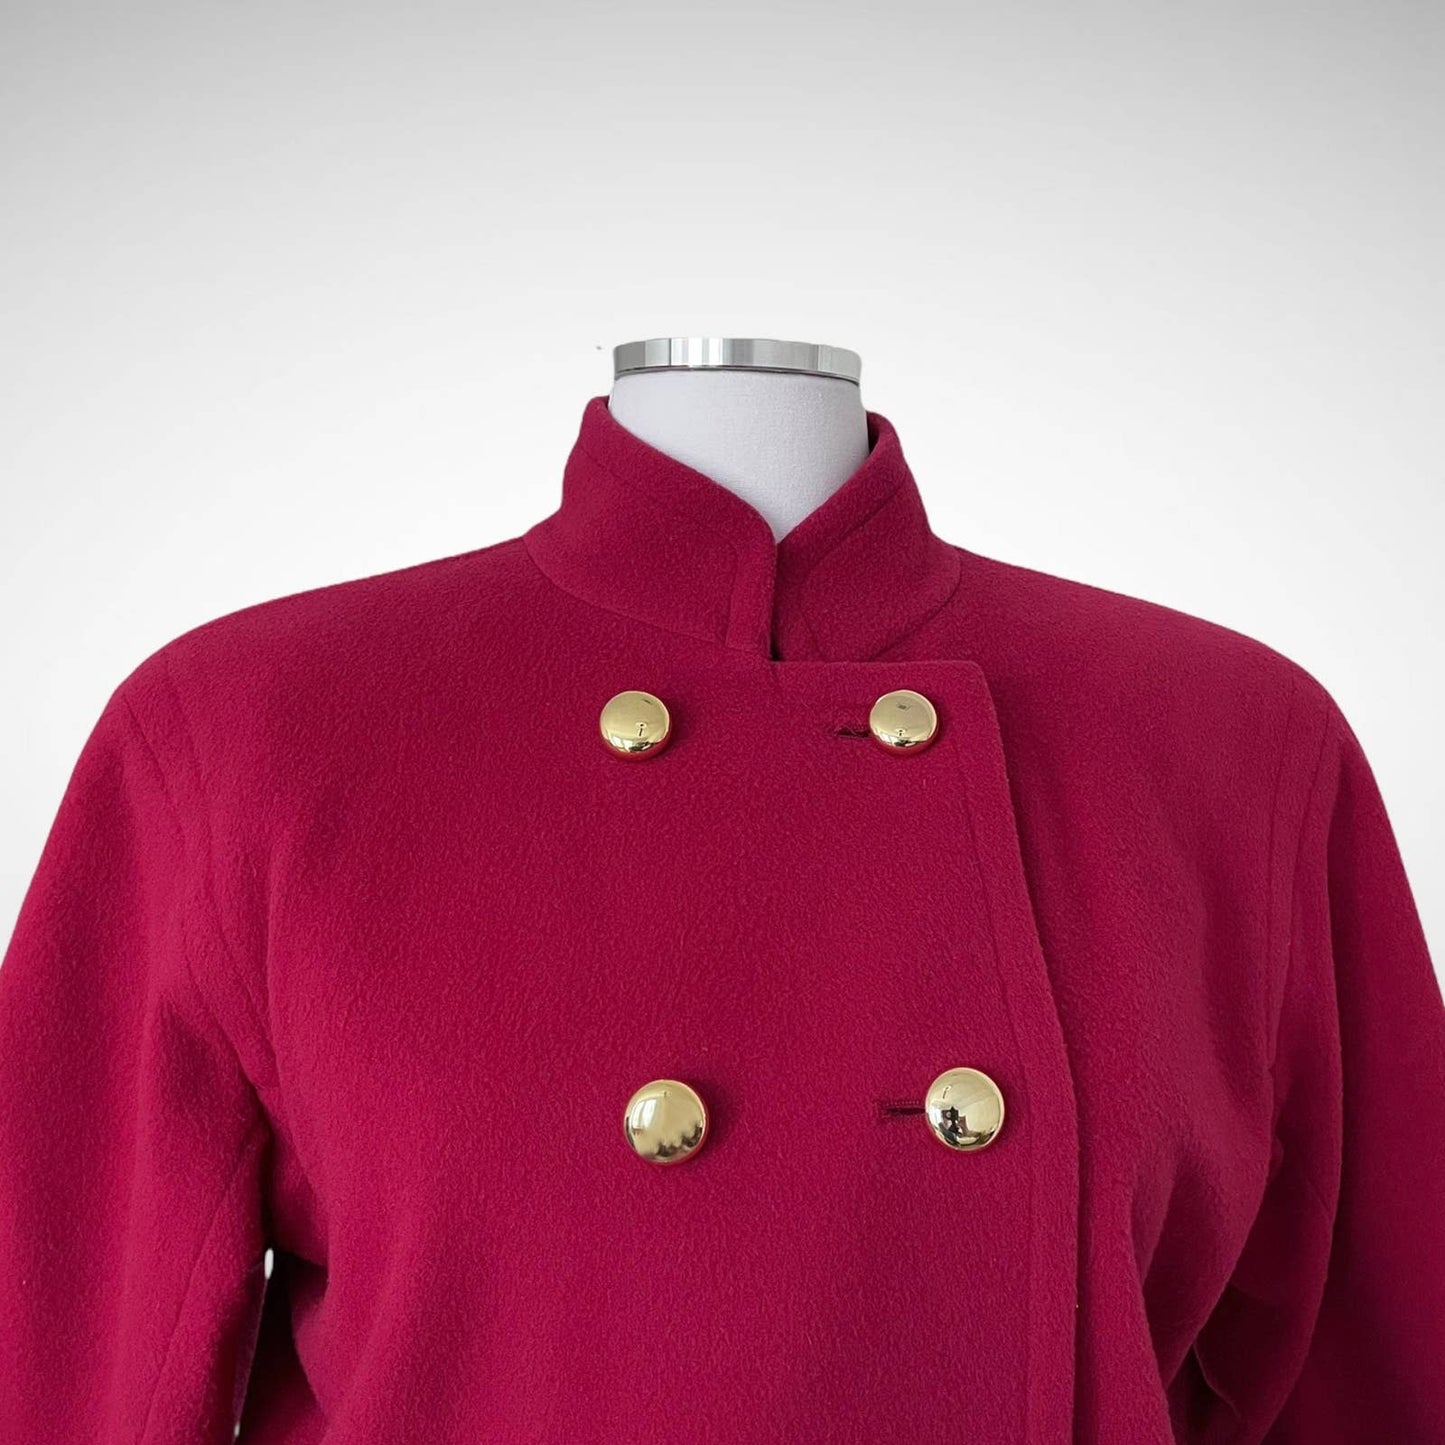 Yves Saint Laurent Rive Gauche red wool coat with gold buttons / 80s mod peacoat size 38 / small medium